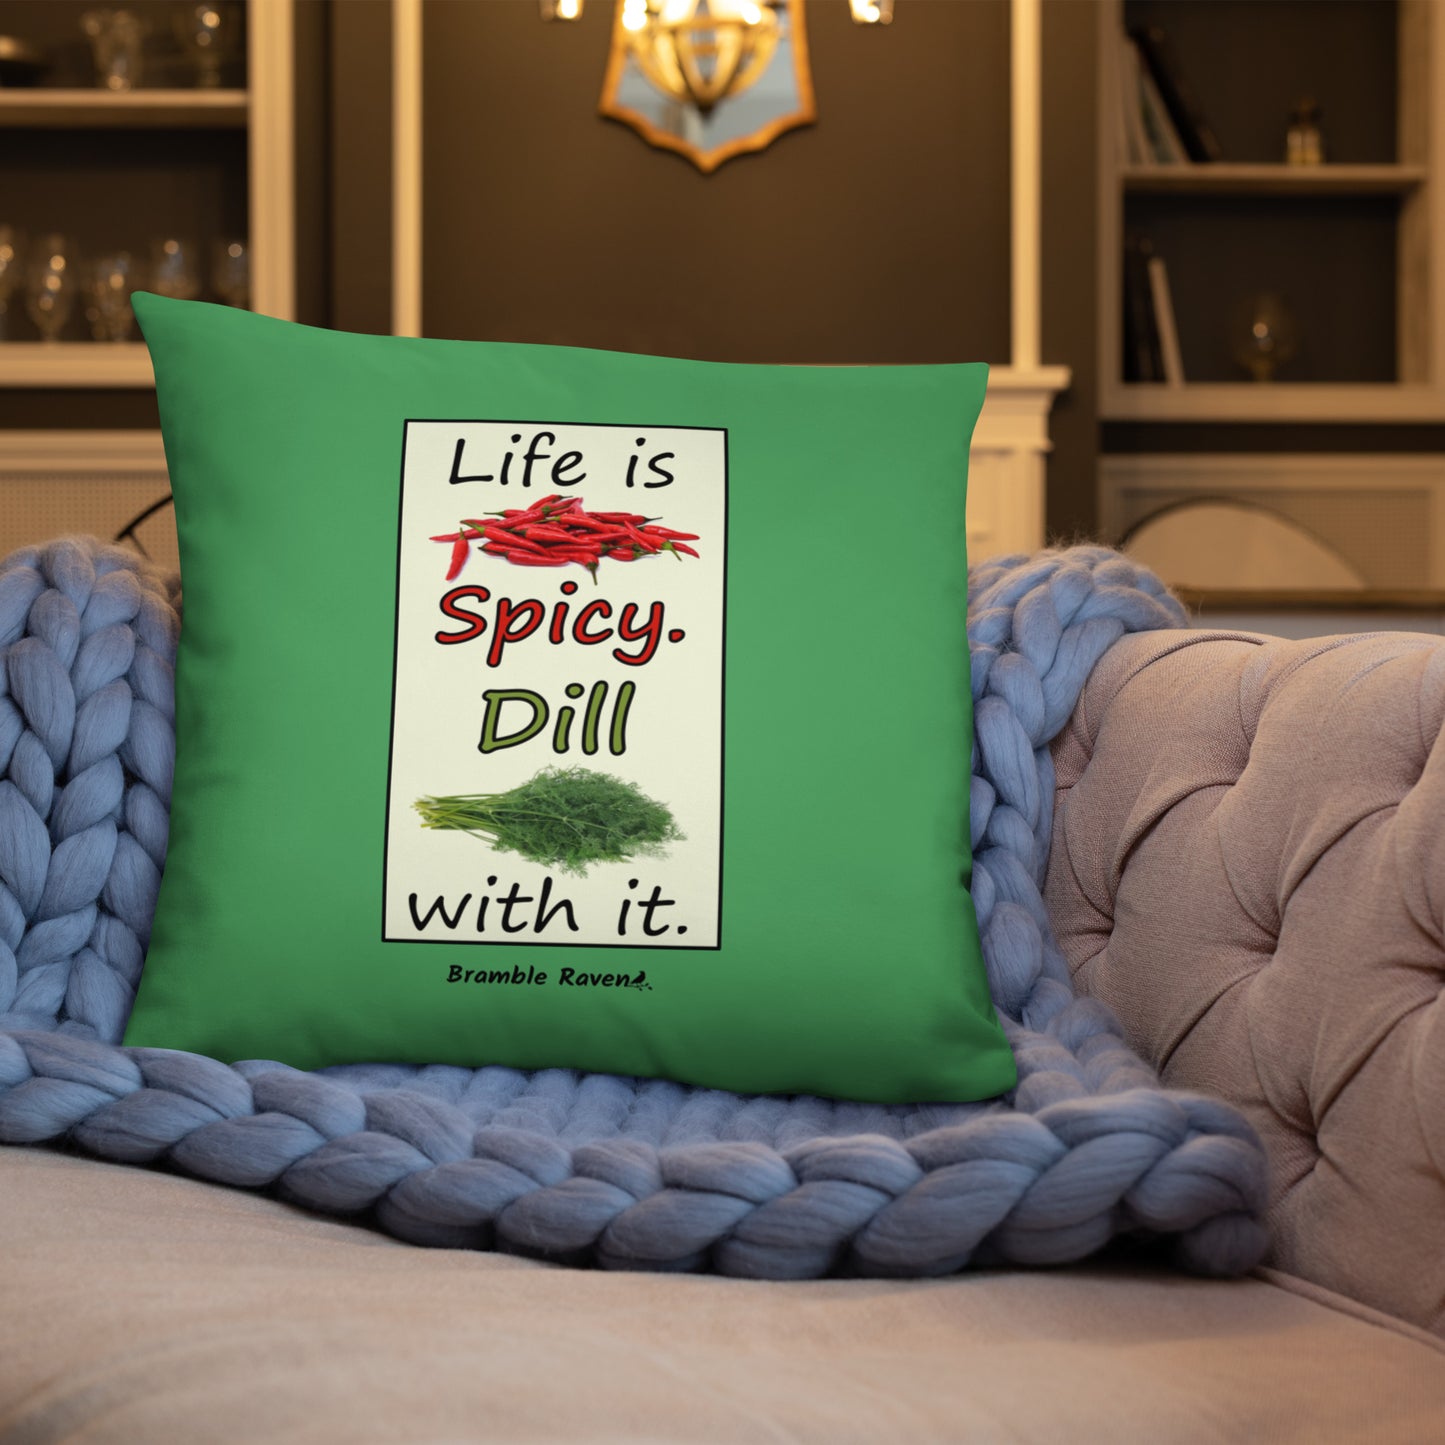 Life is spicy. Dill with it. Phrase with images of chili peppers and dill weed. Rectangular frame for saying on green background. 22 by 22 inch accent pillow. Double sided image. Shown on a blue knitted blanket on a tan couch.